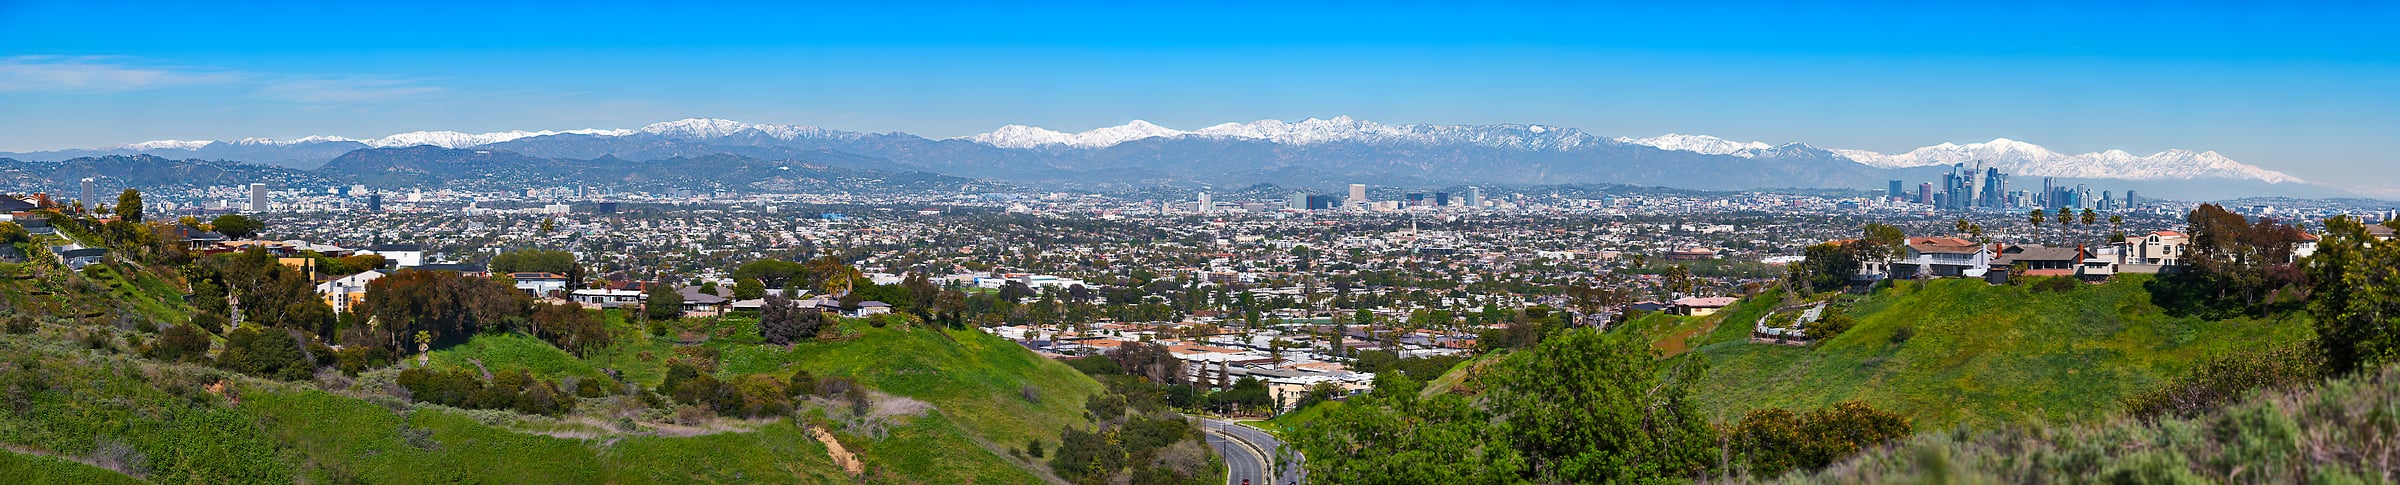 633 megapixels! A very high resolution, large-format VAST photo print of the Los Angeles skyline with snowy mountains in the background; cityscape photograph created by Jim Tarpo in Ladera Heights, California.